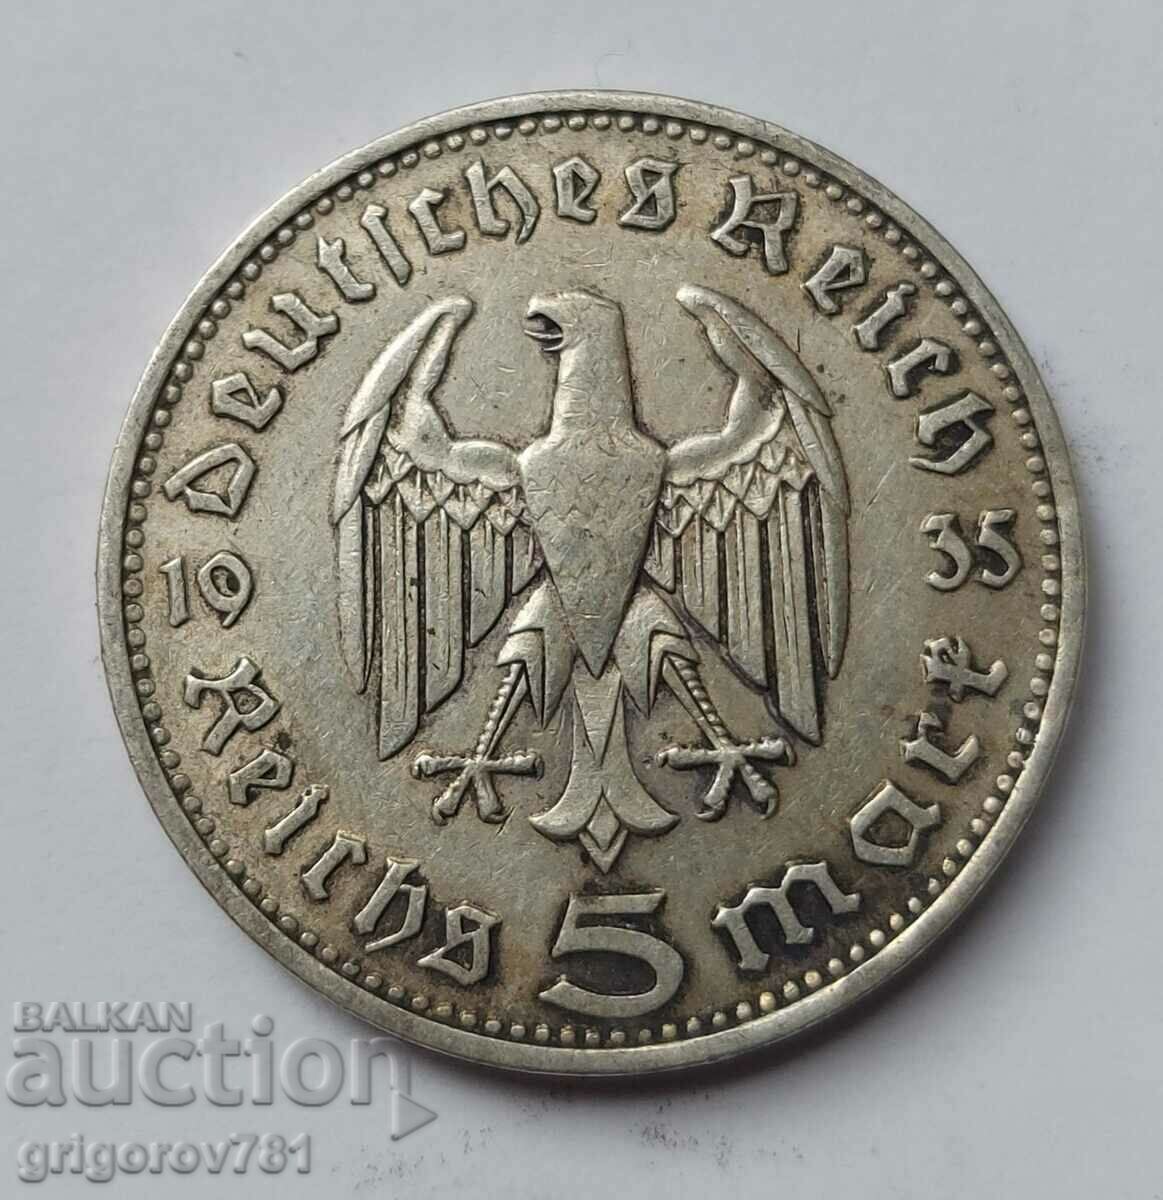 5 Mark Silver Germany 1935 D III Reich Silver Coin #23